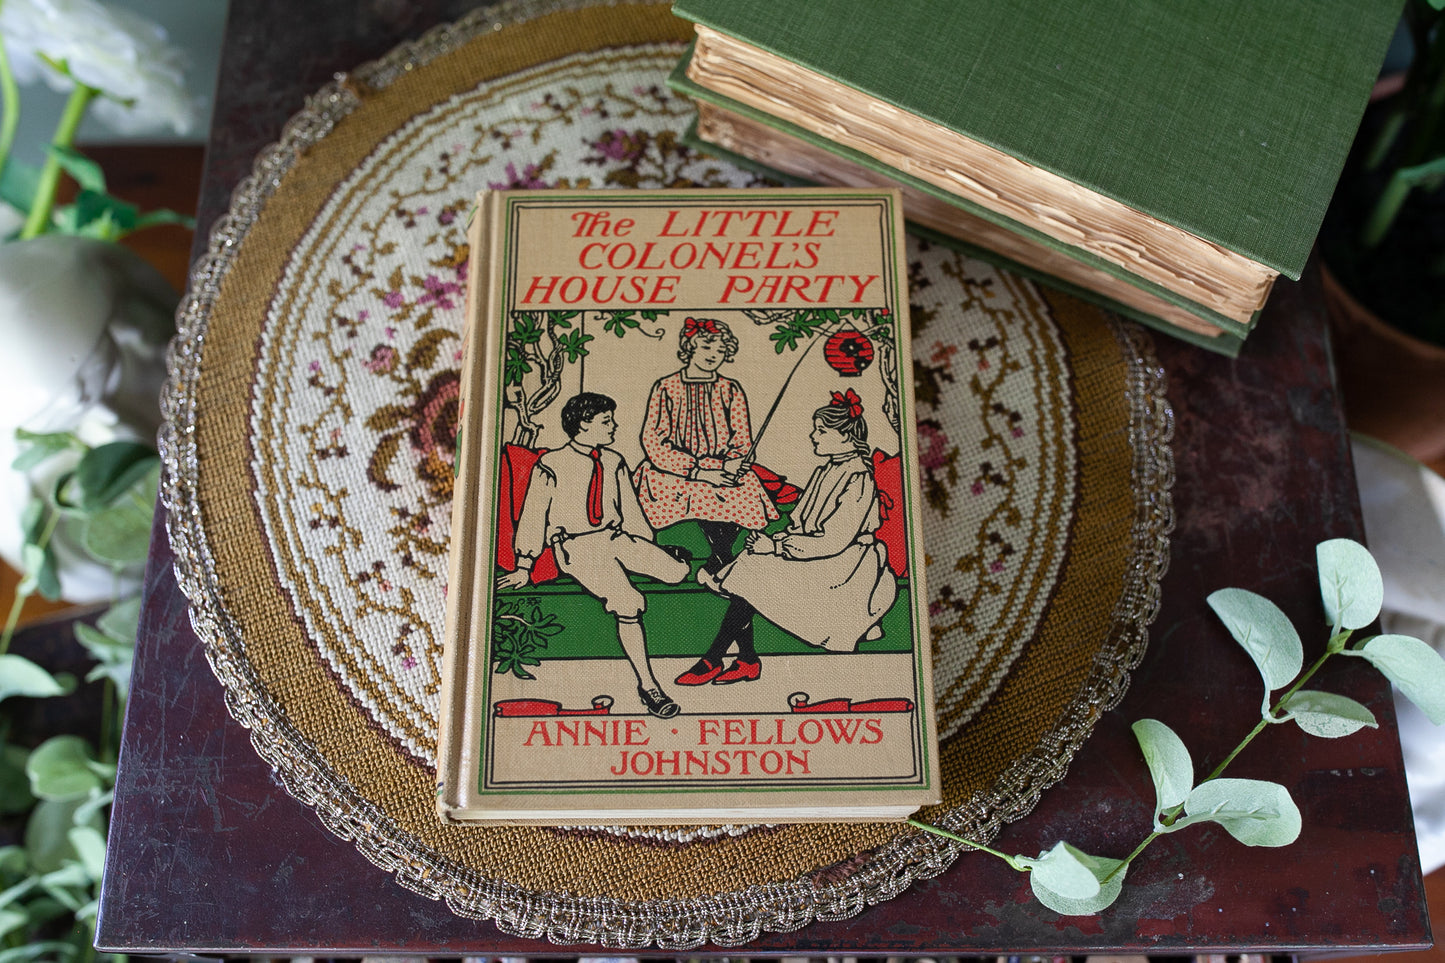 The Little Colonel's House Party - Annie Fellows Johnston - Antique Book-1900